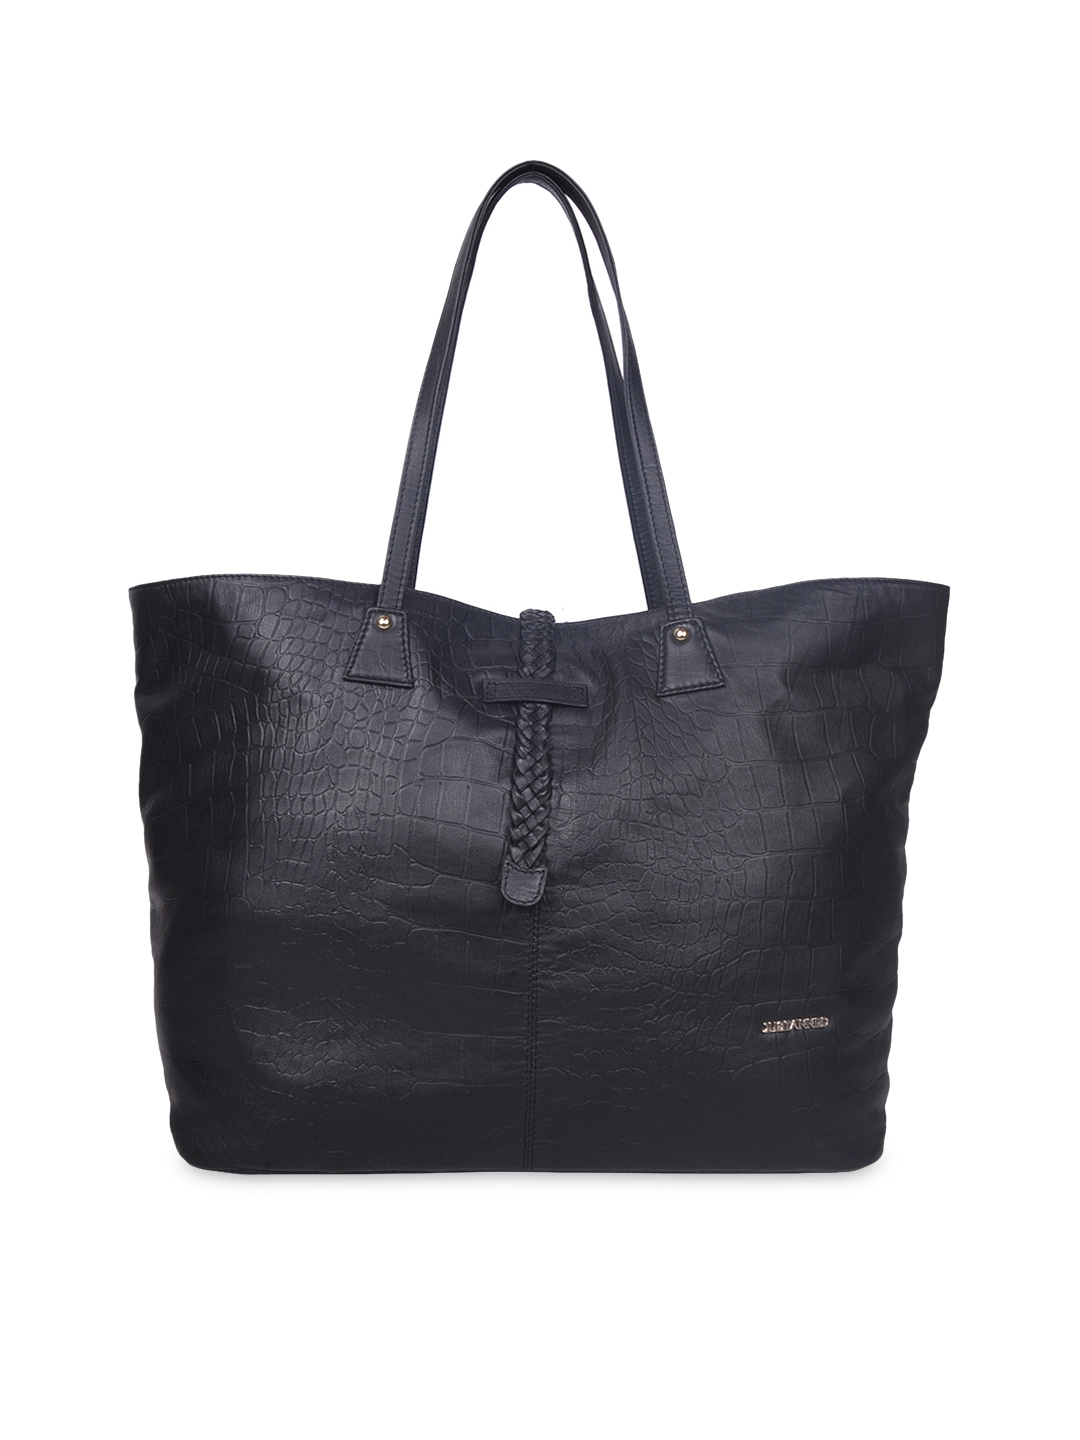 Myntra Justanned Women Black Leather Tote Bag 809448 | Buy Myntra Justanned Tote Bags at best ...